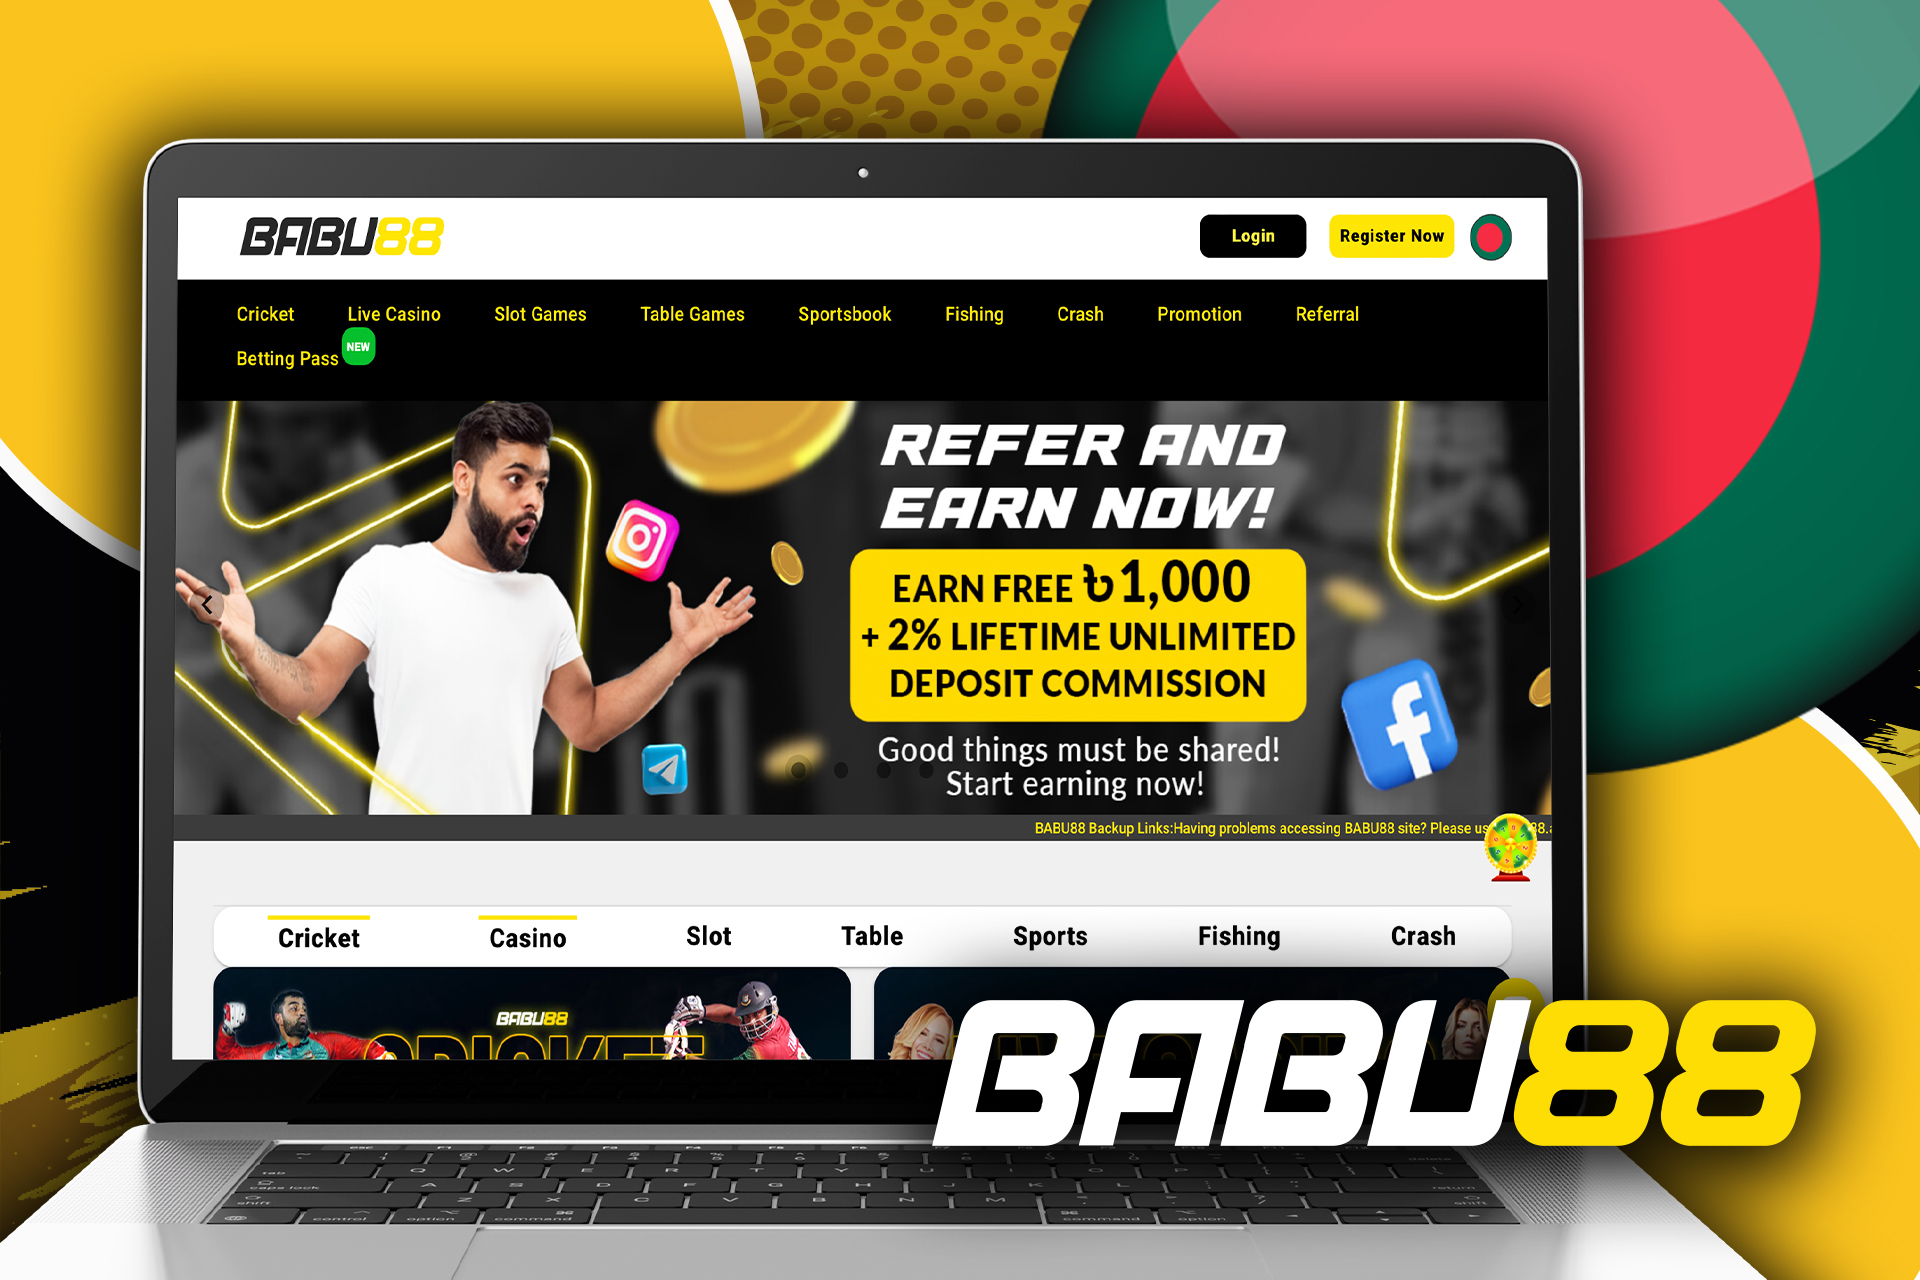 Babu88 is a betting shop and online casino on the same website.